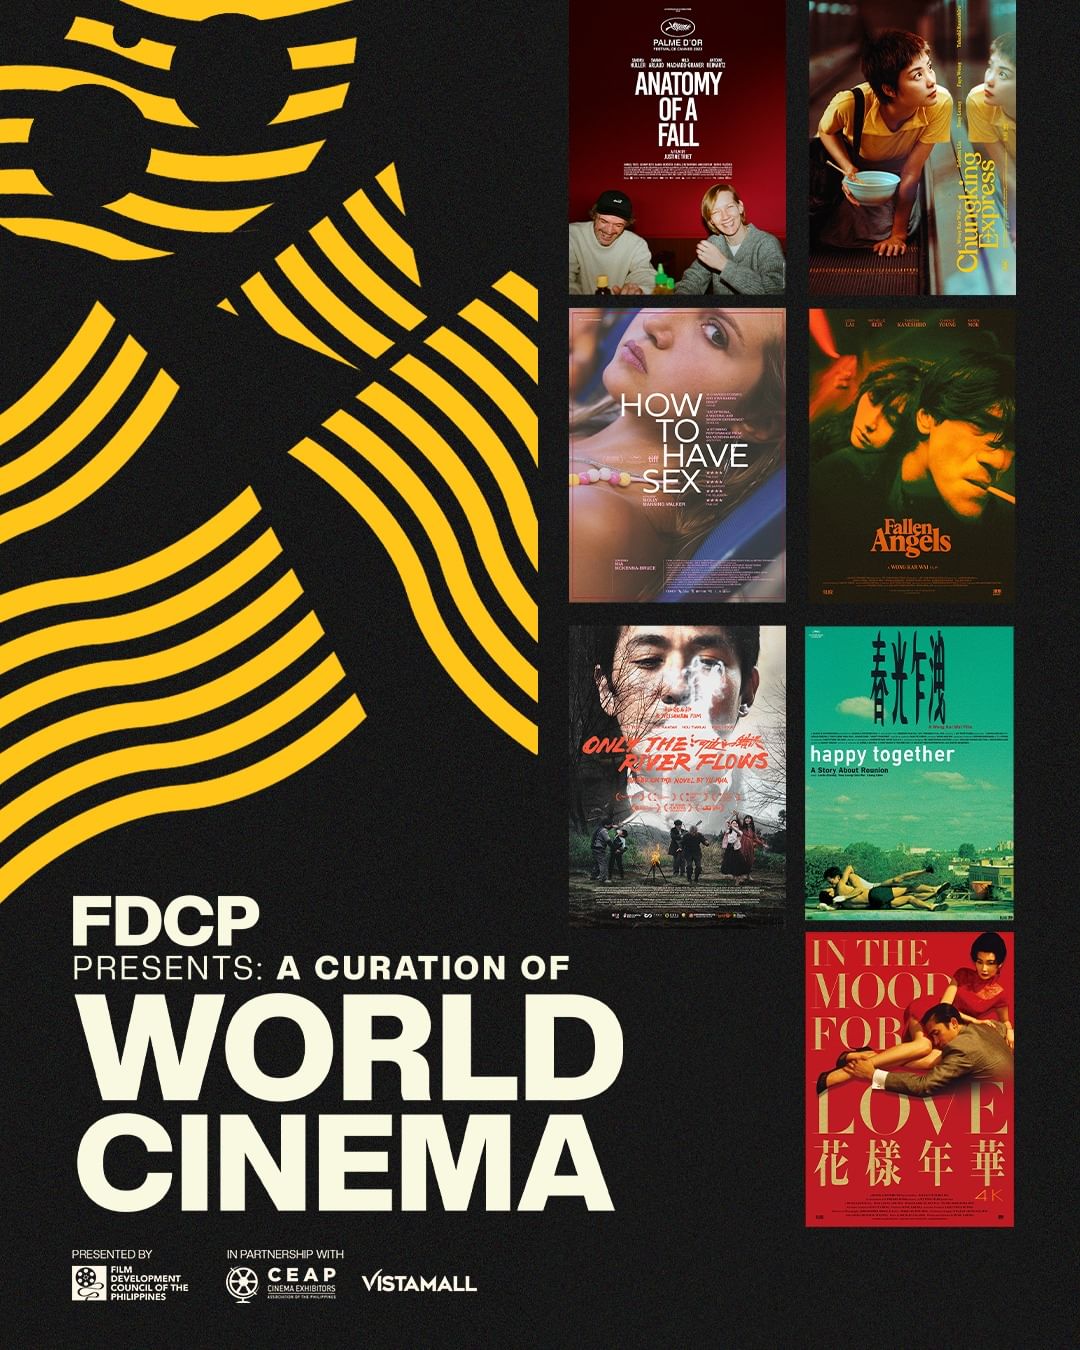 FDCP’s official poster for “A Curation of World Cinema”